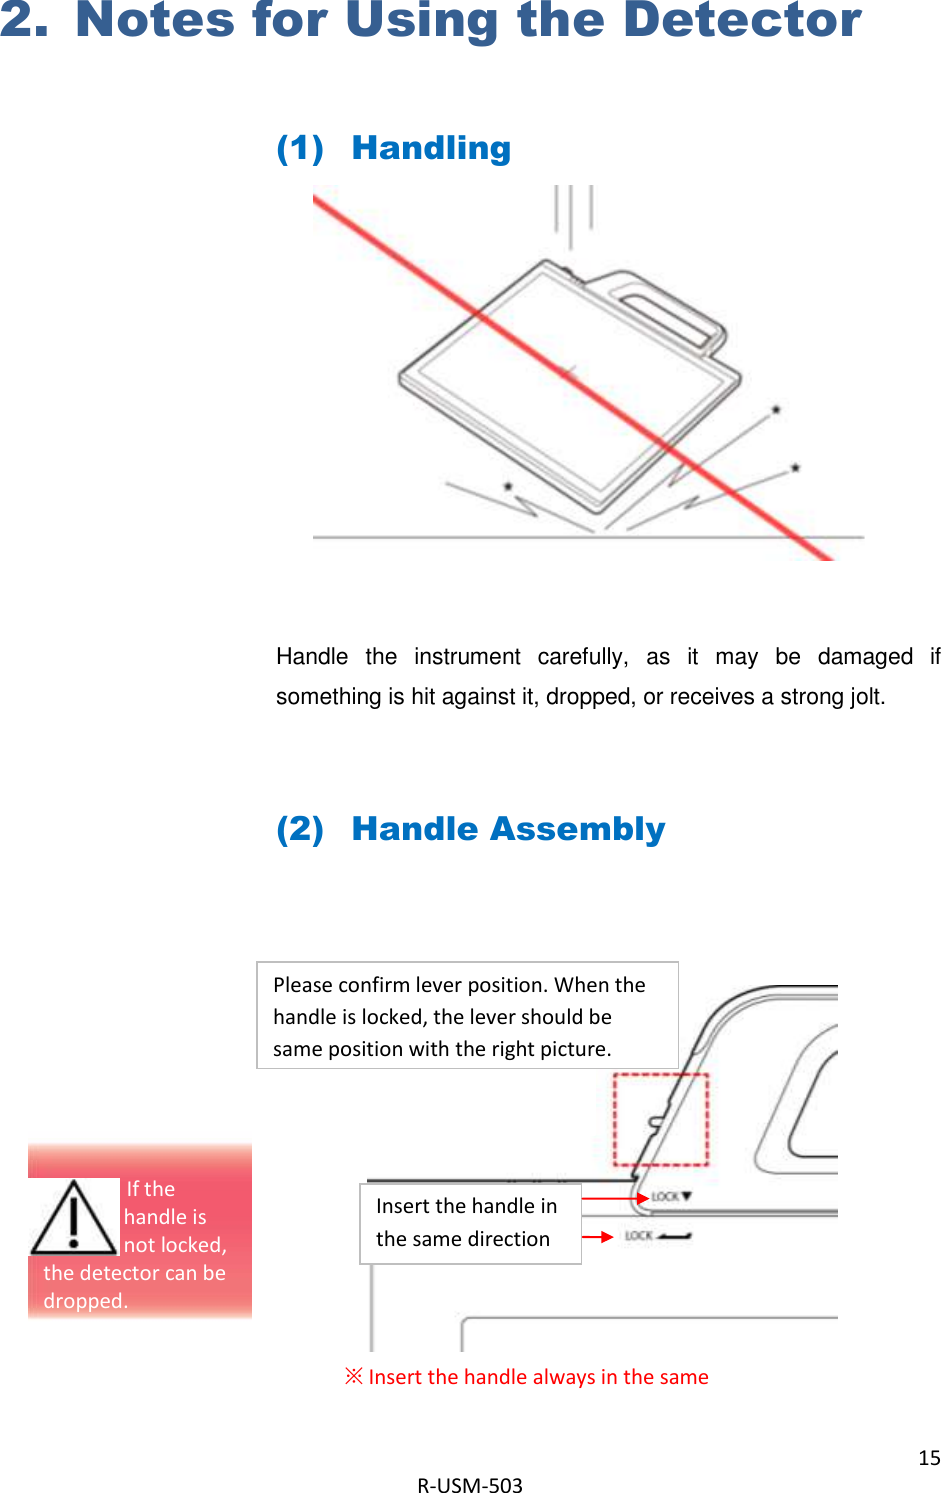 15  R-USM-503   2. Notes for Using the Detector  (1) Handling         Handle  the  instrument  carefully,  as  it  may  be  damaged  if something is hit against it, dropped, or receives a strong jolt.  (2) Handle Assembly          ※ Insert the handle always in the same Please confirm lever position. When the handle is locked, the lever should be same position with the right picture.   Insert the handle in the same direction                                  If the  handle is  not locked, the detector can be dropped. 